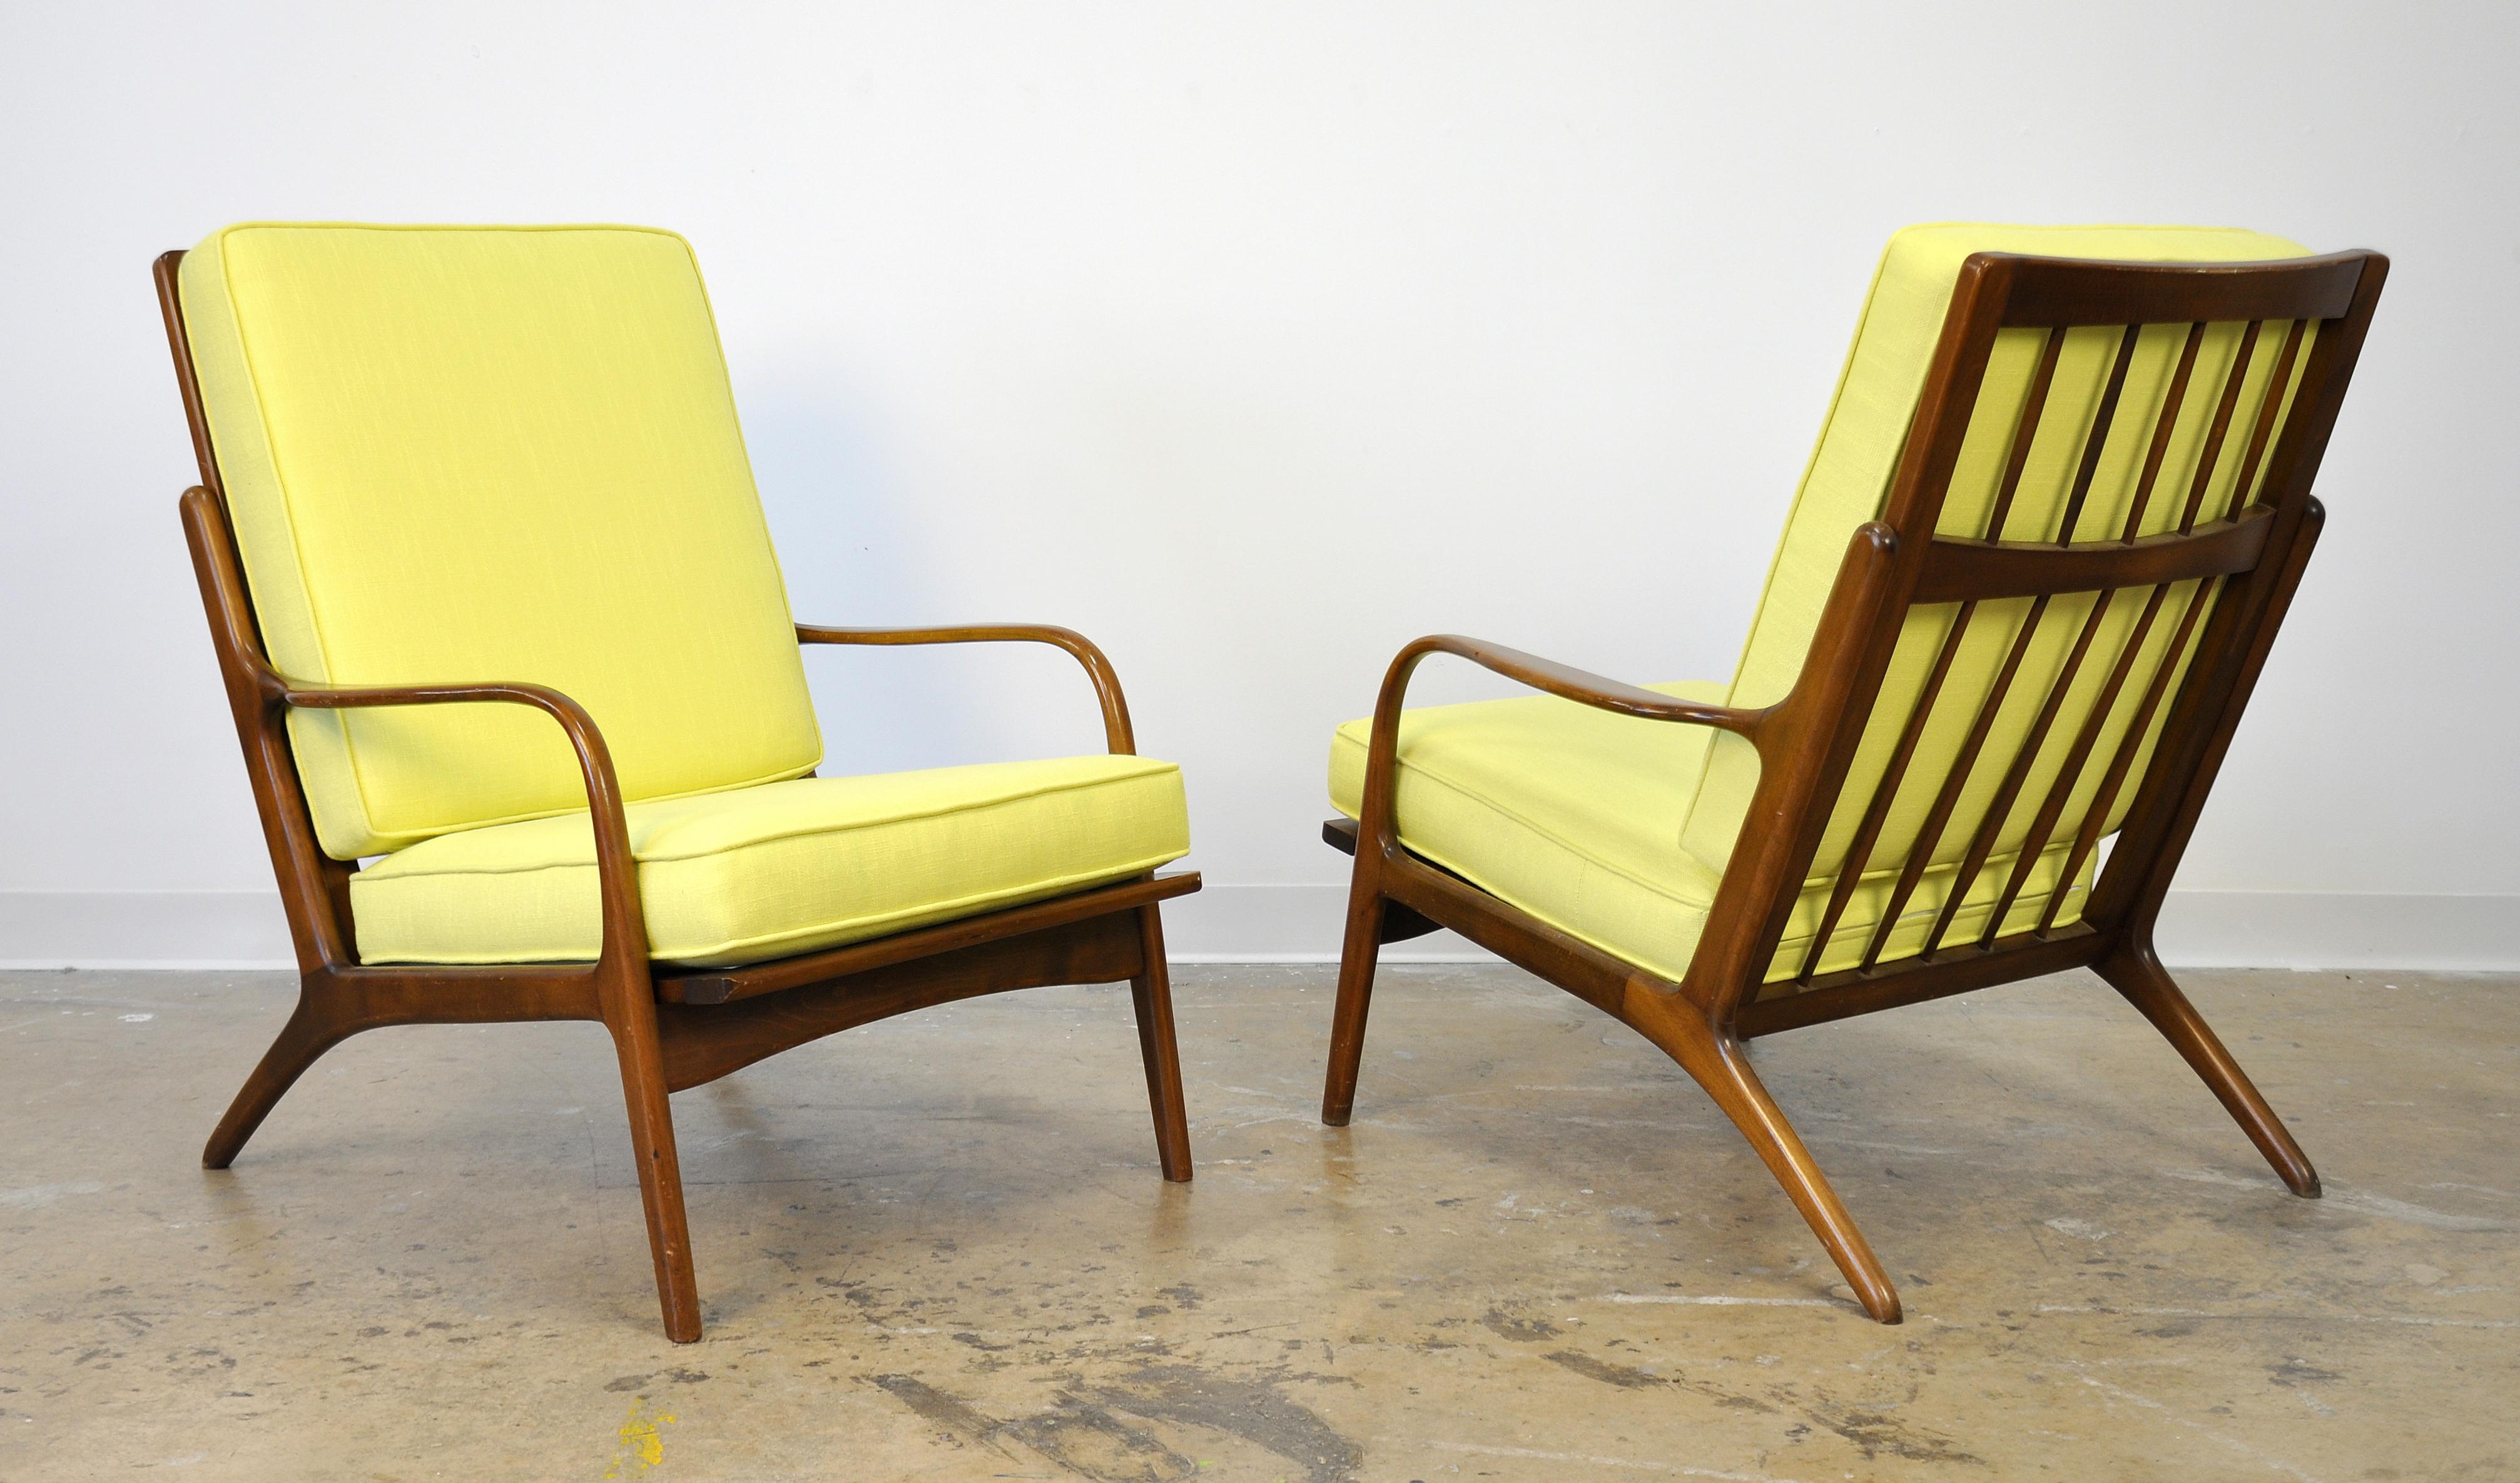 A pair of vintage midcentury high back armchairs, dating from the 1950s and attributed to designer Ib Kofod-Larsen. The frame of the easy chair has sleek, slender arms, a spindle high back and splayed legs. The lines are very similar to the bent arm